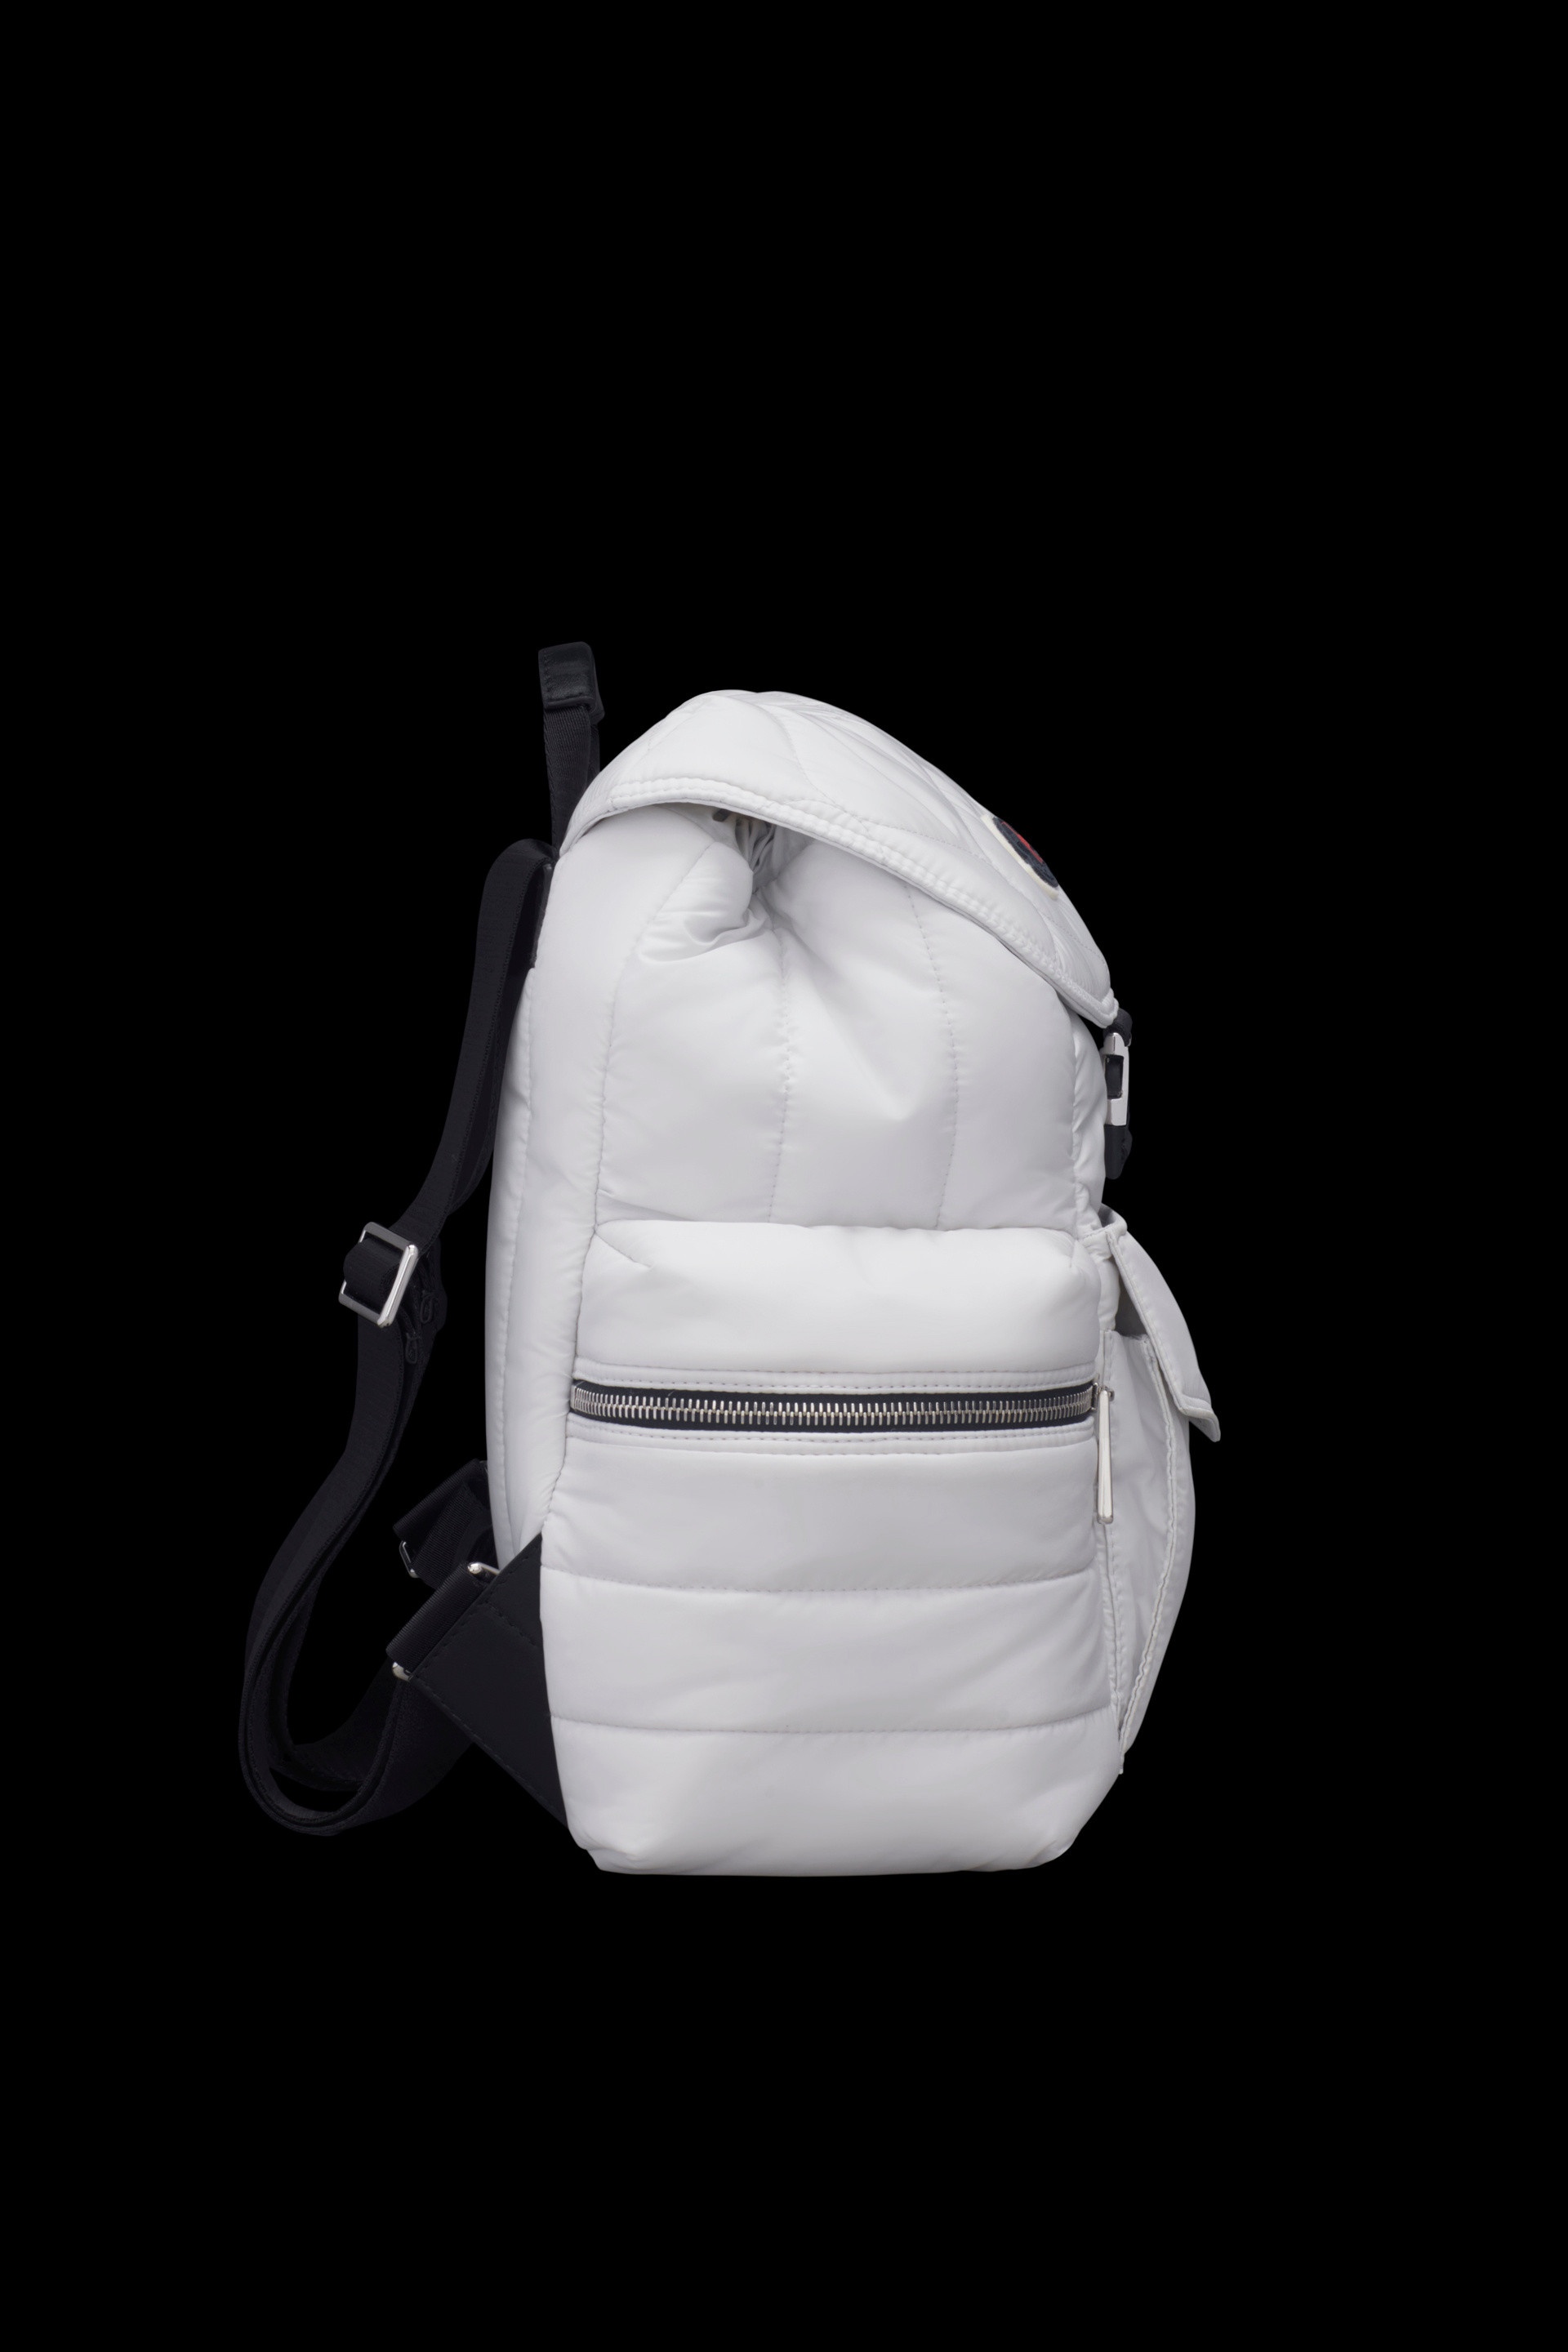 Astro Backpack - 4